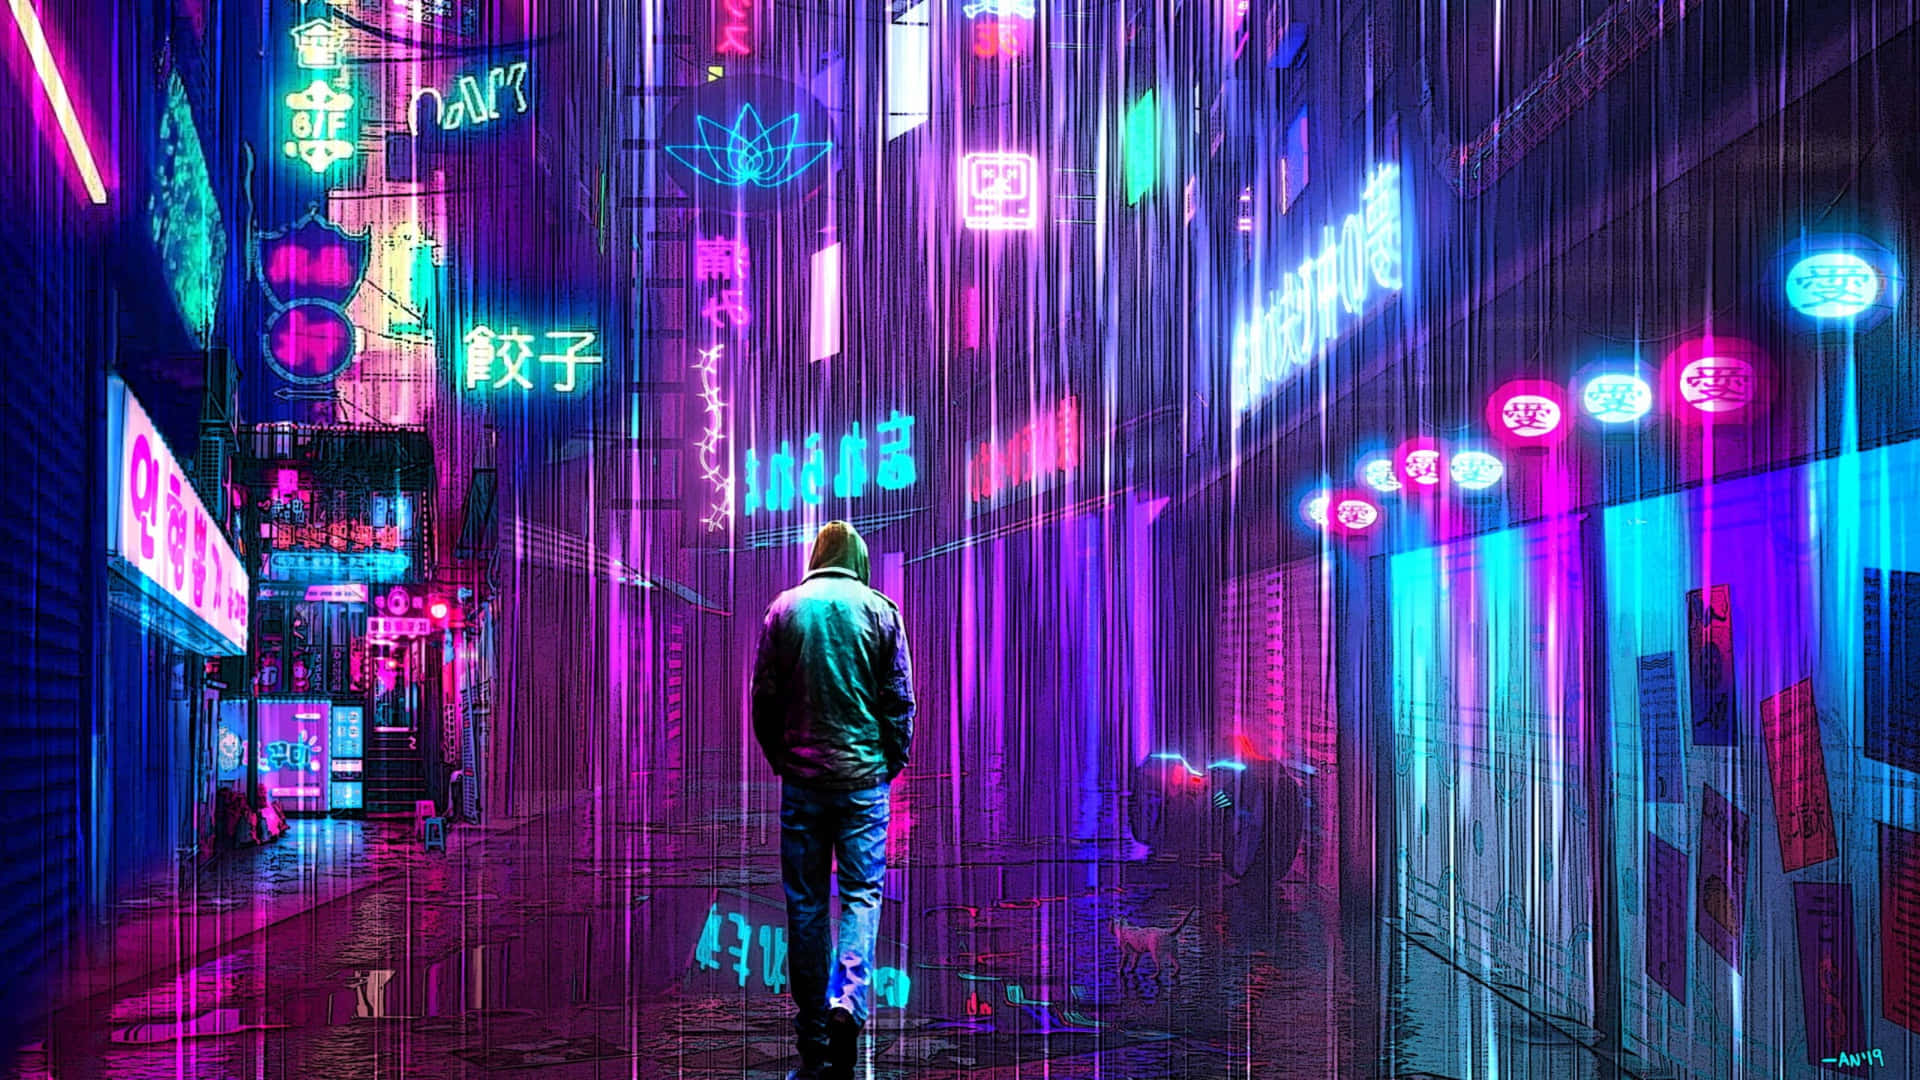 Page 47 | Neon City Wallpaper Images - Free Download on Freepik